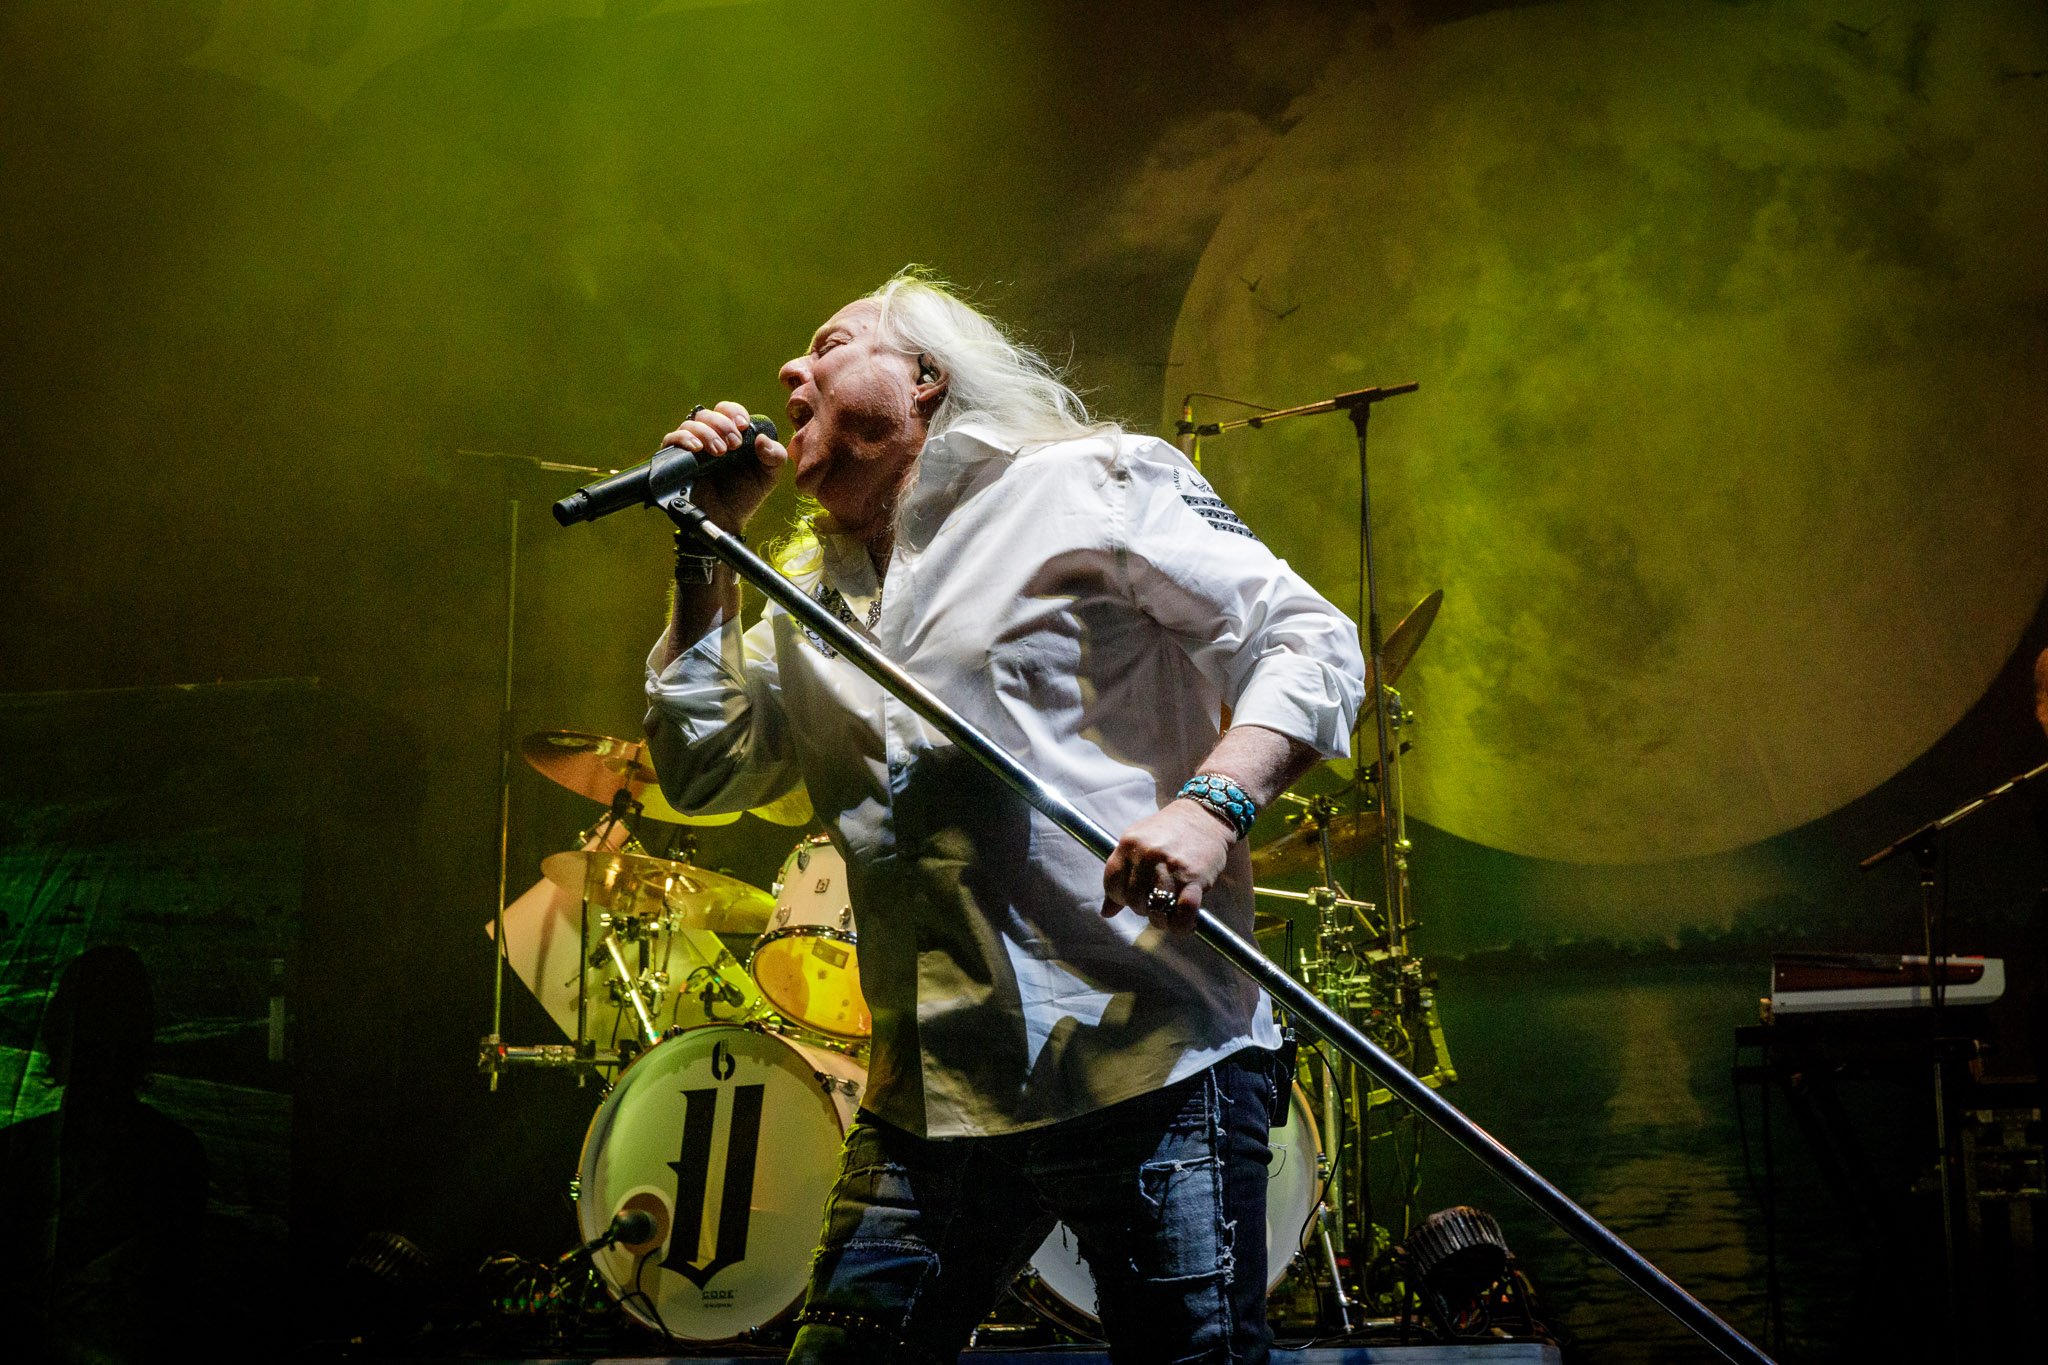 Uriah Heep at the O2 Apollo in Manchester on January 28th 2022 